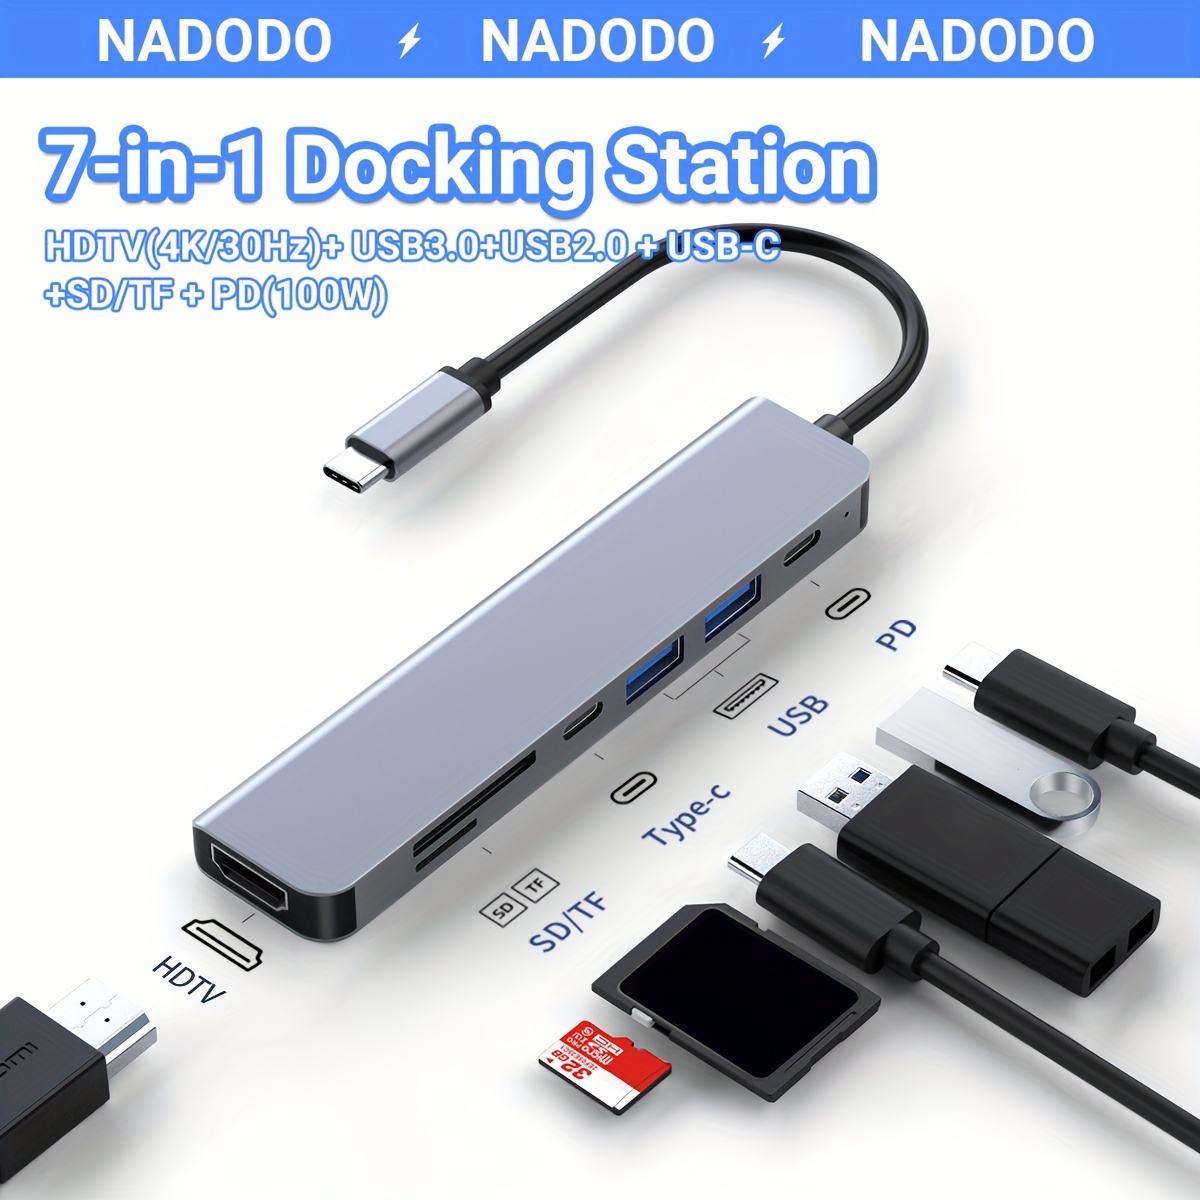 MacBook Pro Docking Station 9 in 2 MacBook Air Adapter USB C Hub Triple  Display for MacBook Pro Air Mac HDMI Dock Dongle with 100W PD,USB 3.0,SD/TF